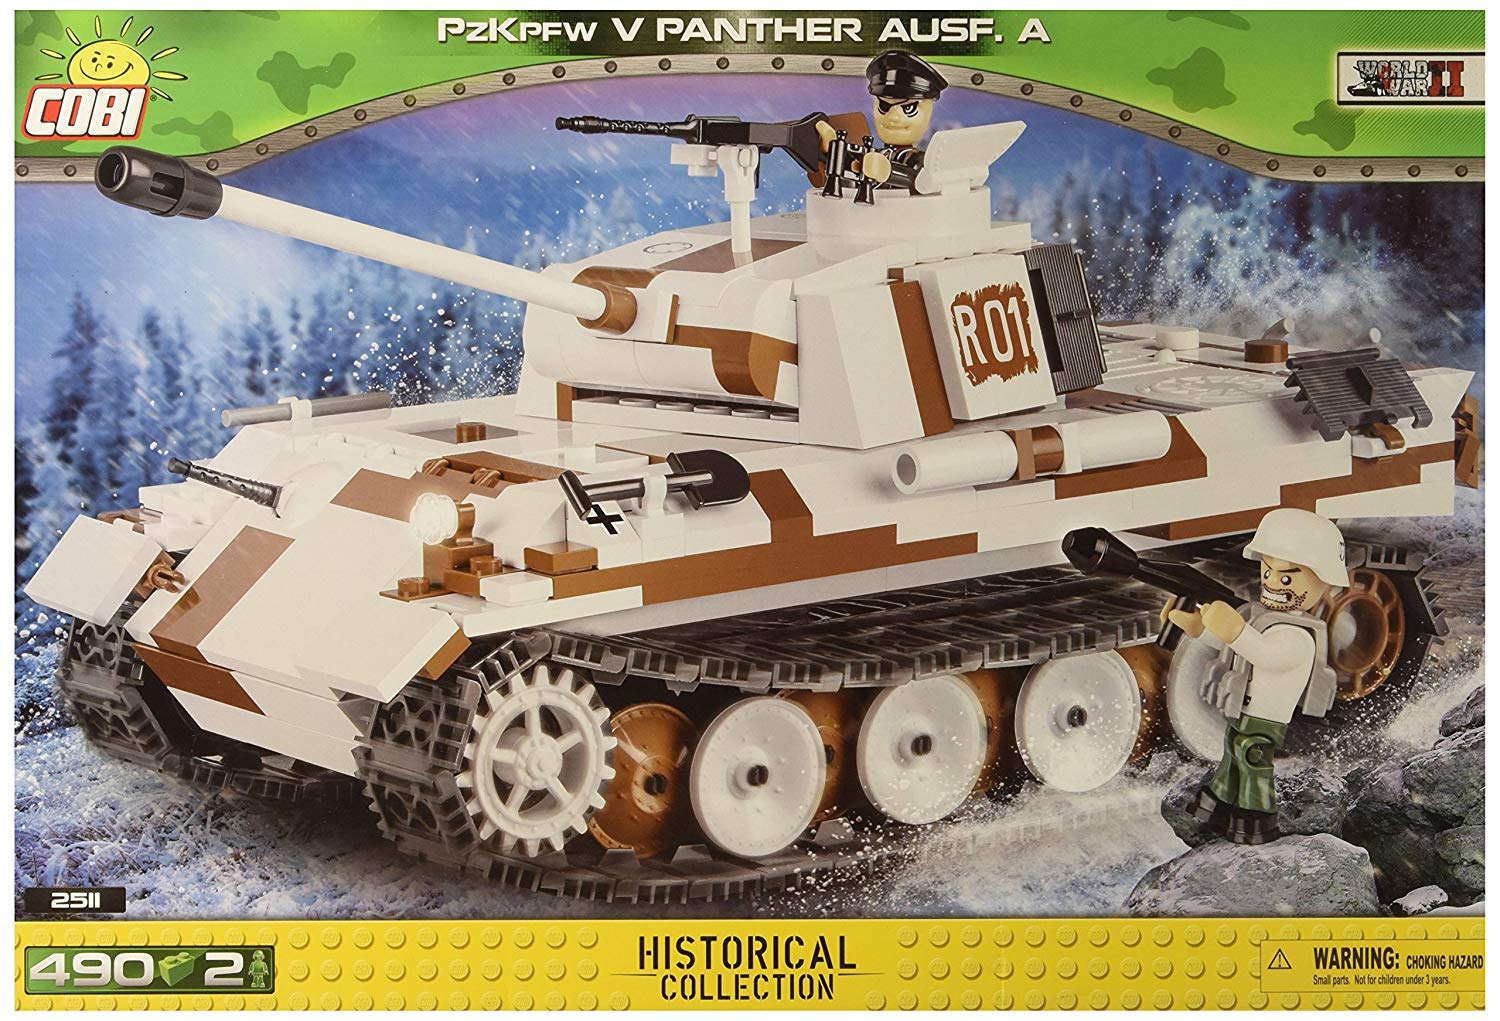 2511 - Panzer V Panther Ausf. A